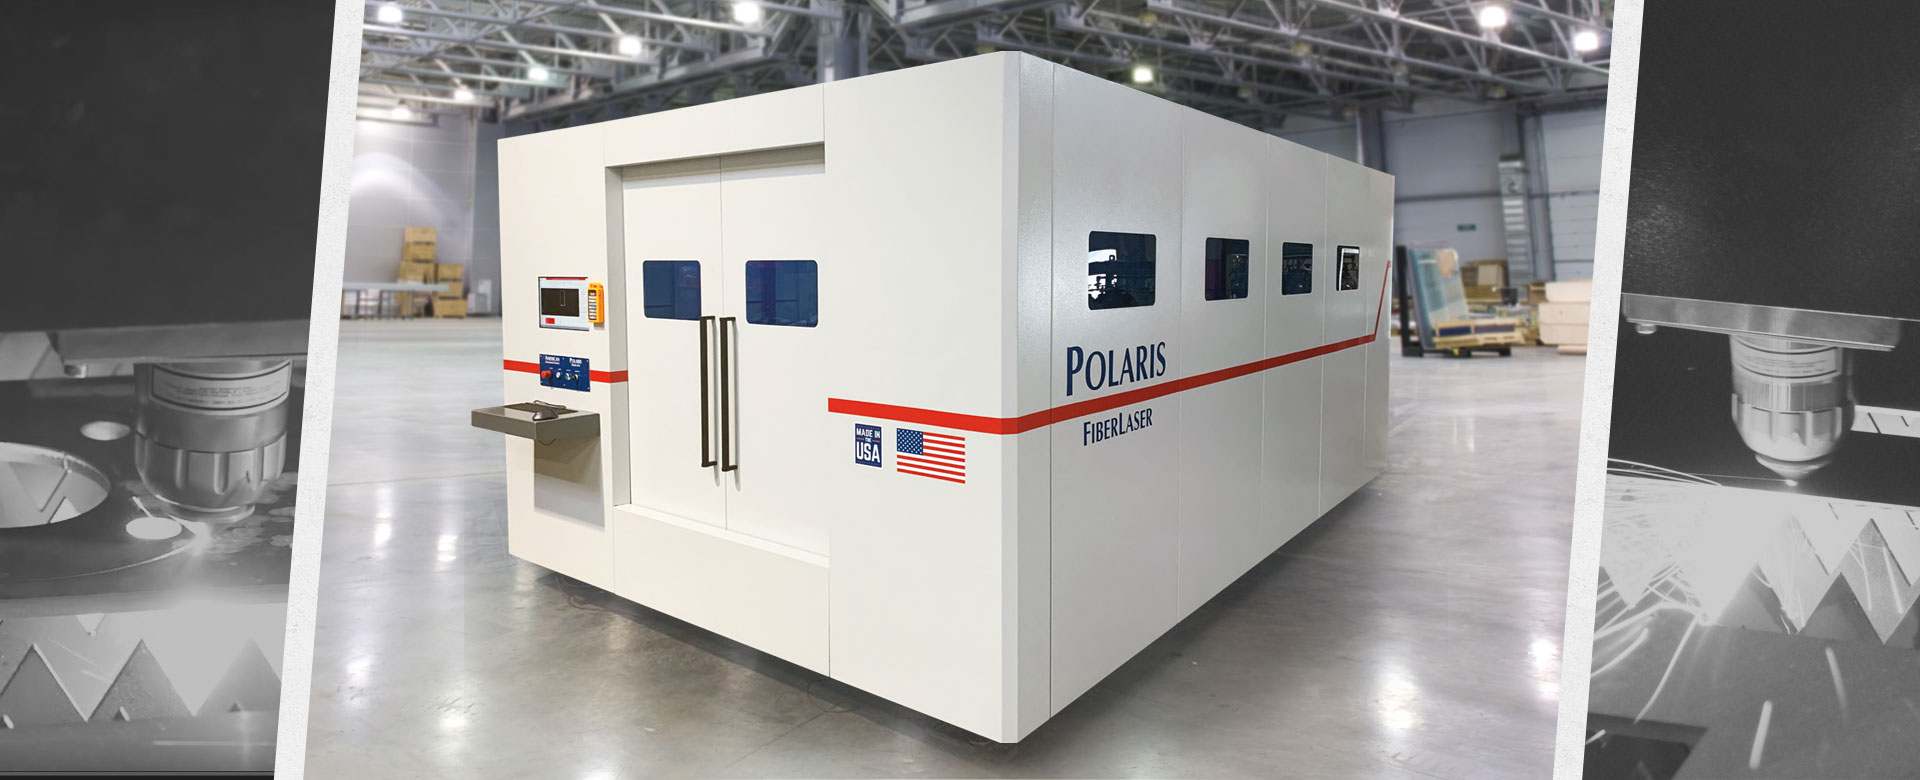 GSS Machinery offers Polaris X12 fiber laser cutting systems.